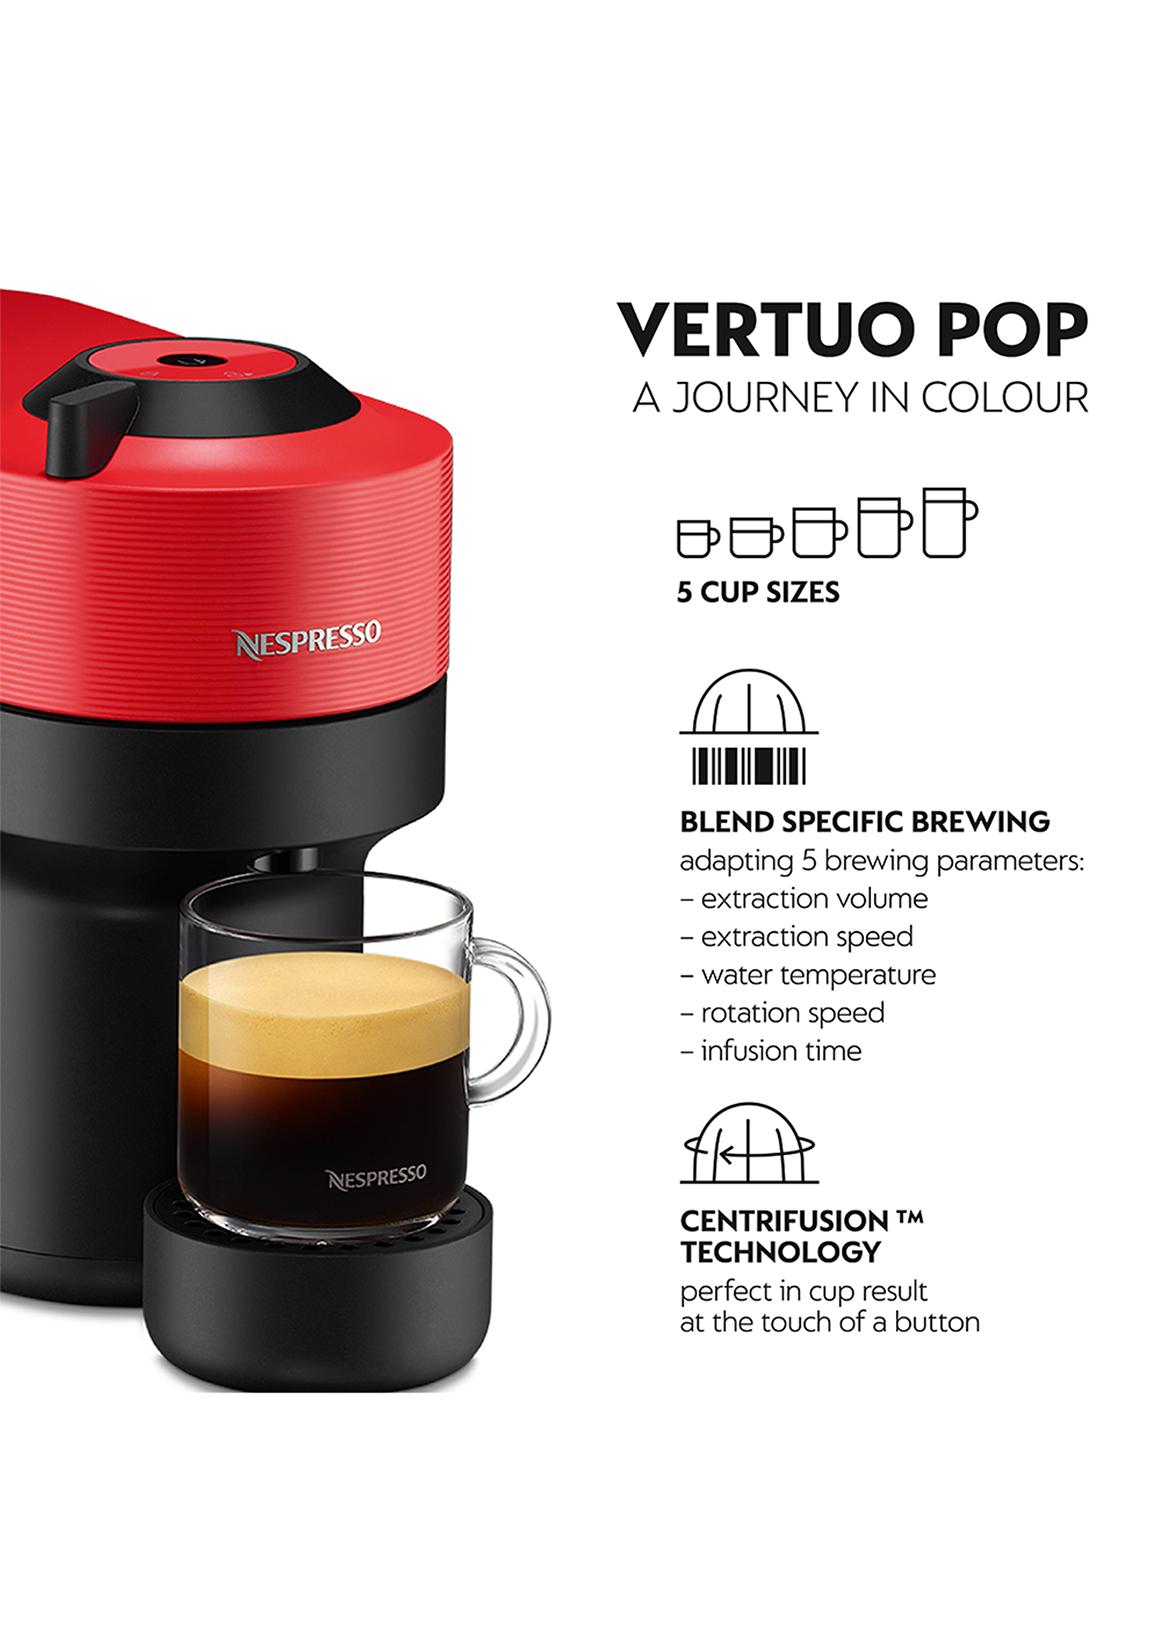 ADD A TOUCH OF COLOUR WITH THE NESPRESSO VERTUO POP COFFEE MACHINE – @home